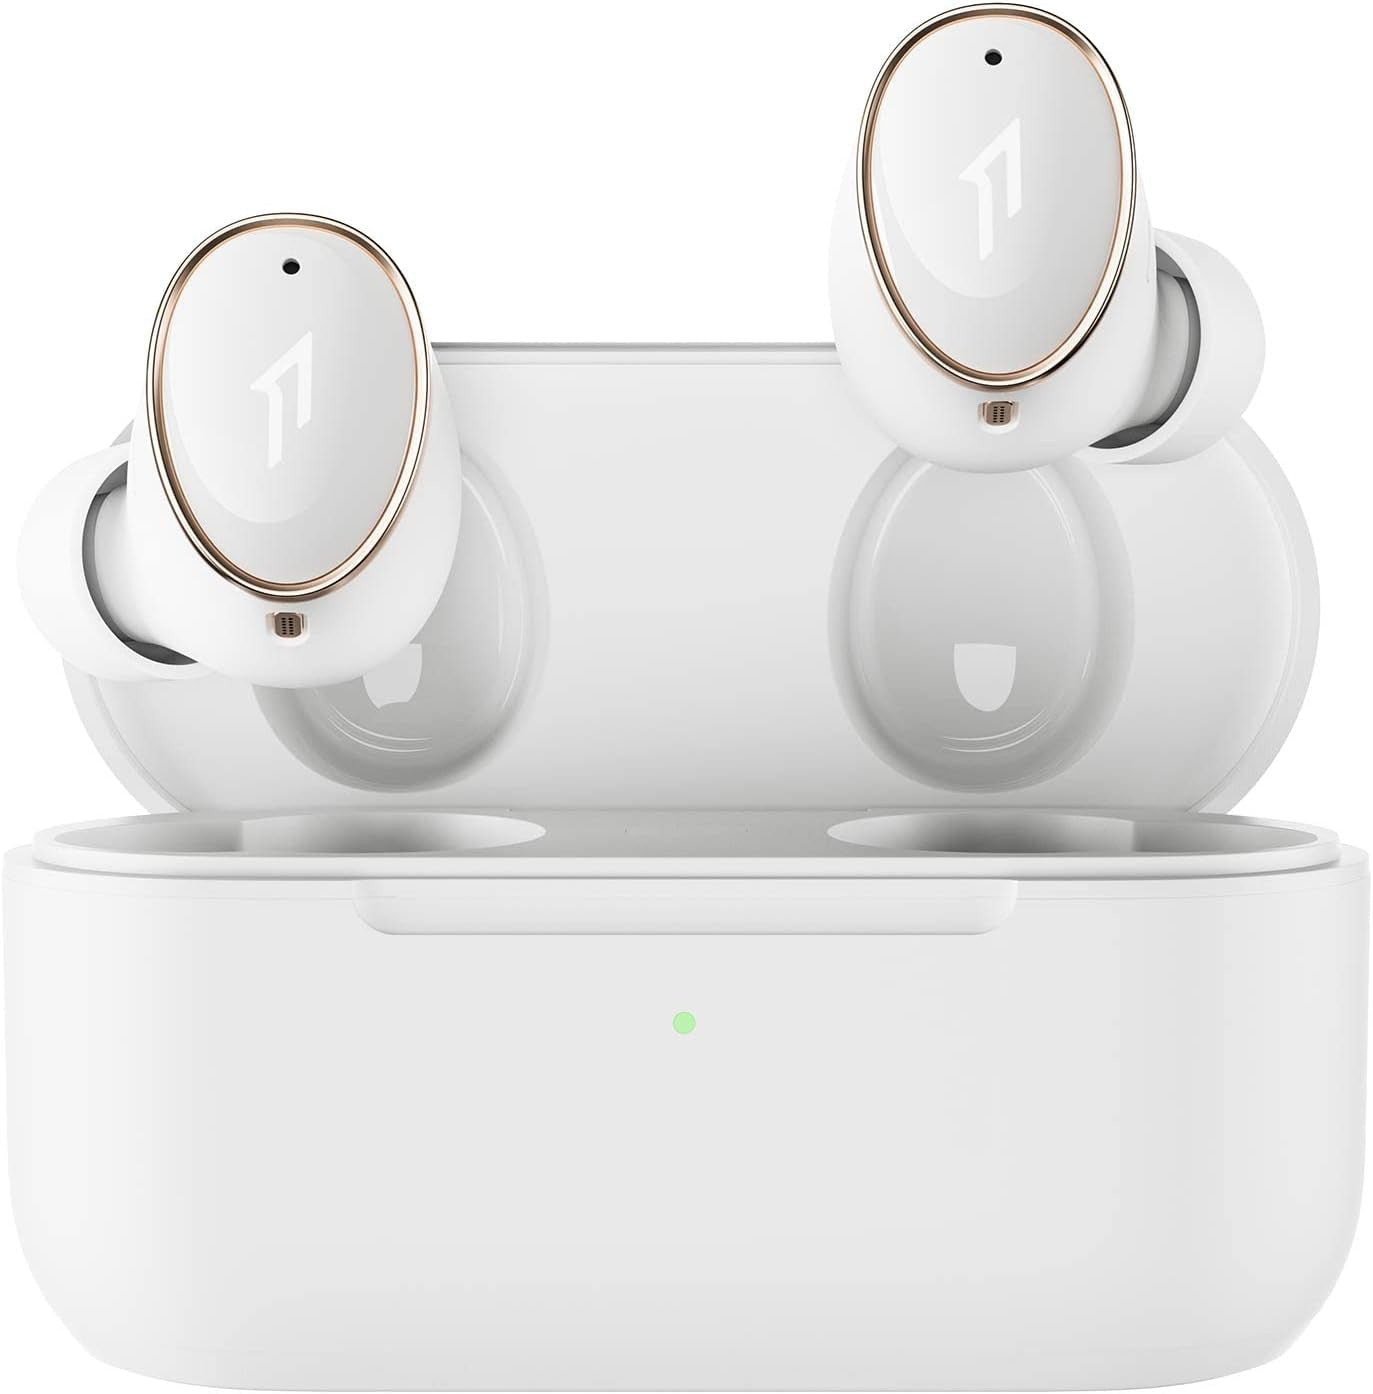 1MORE EVO EH902 ANC Wireless Earbuds - White